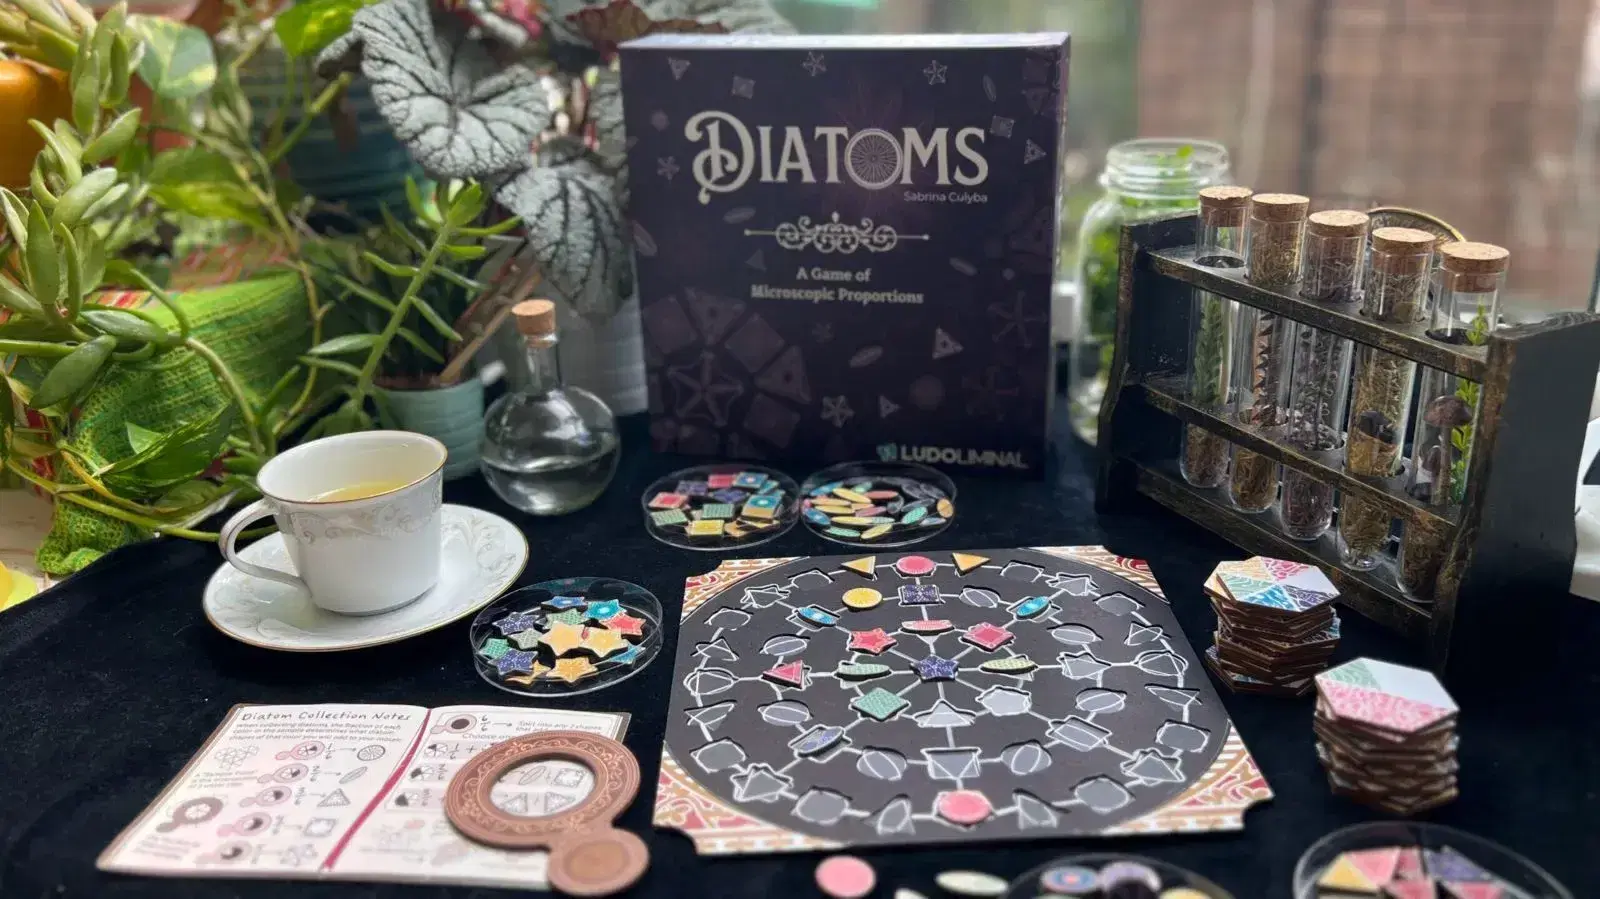 Diatoms is a cosy tile-placement game of microscopic proportions